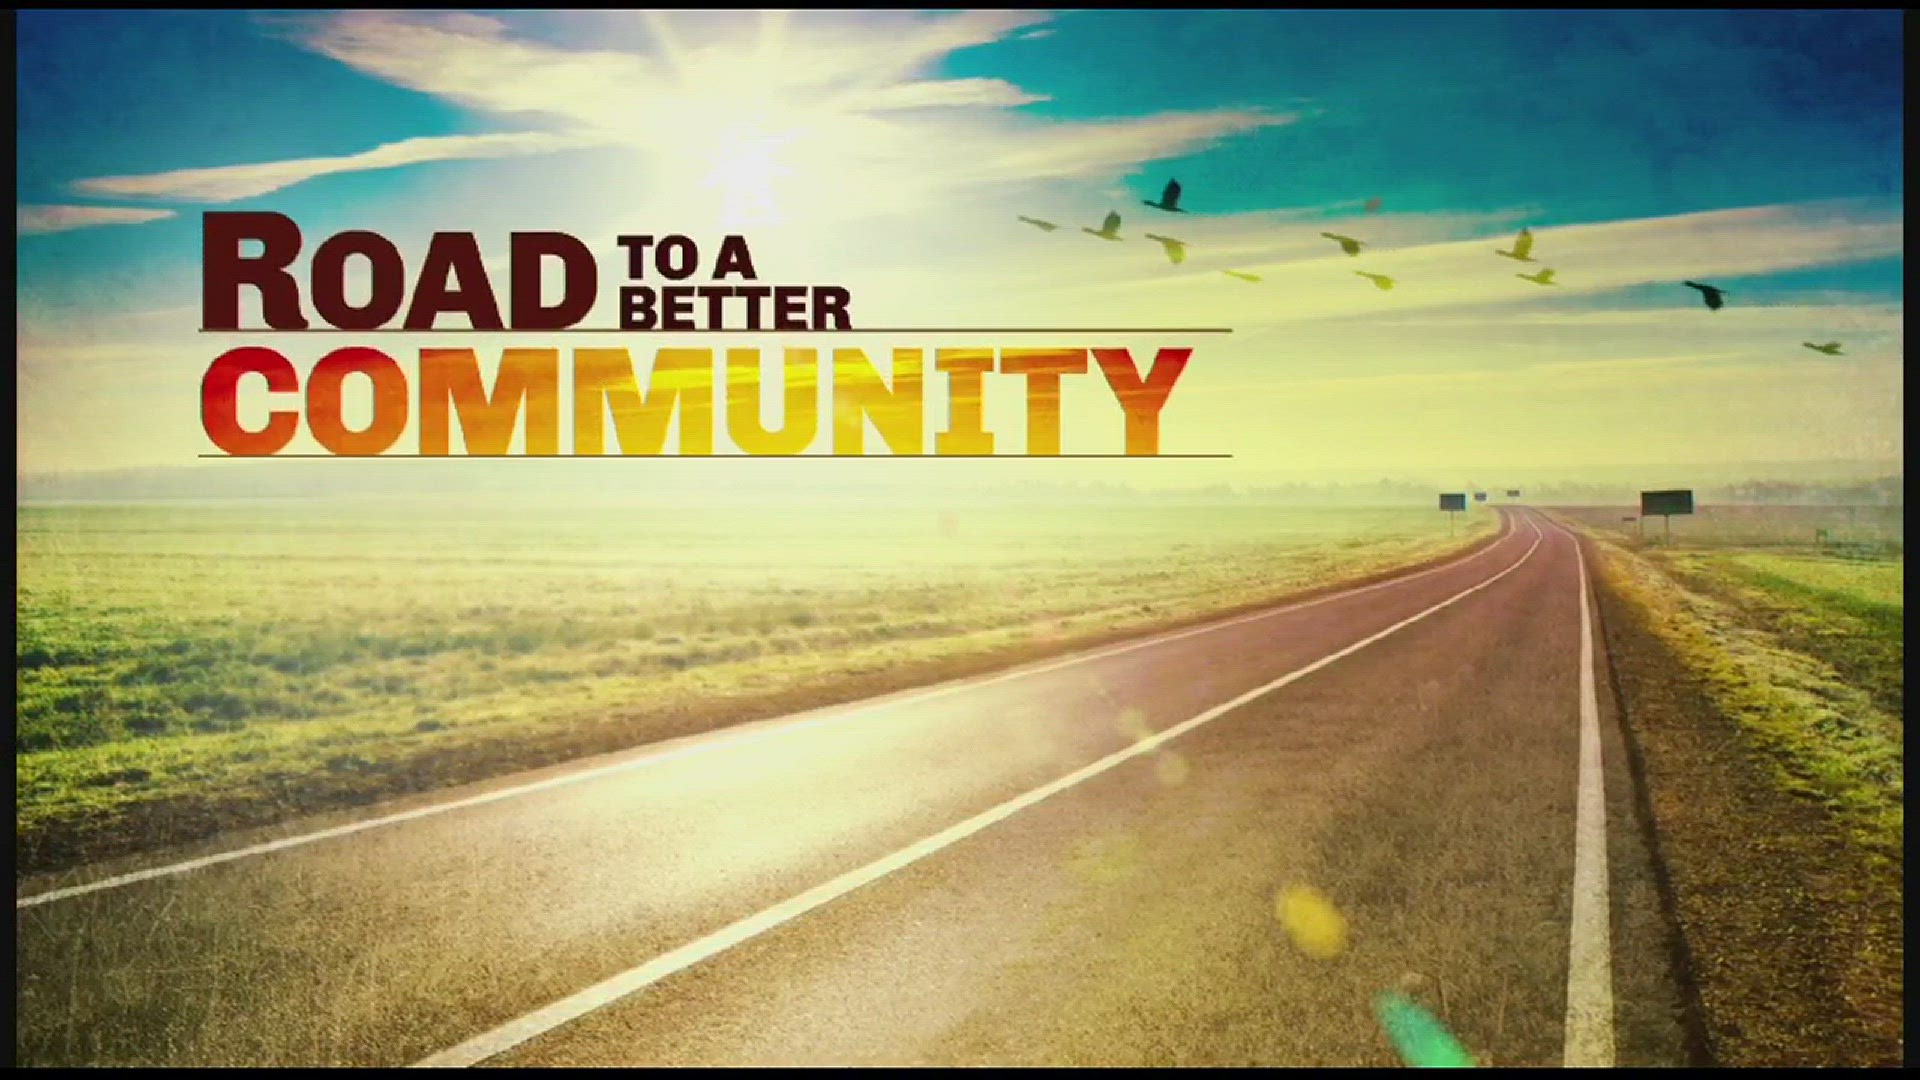 The Road 2 A Better Community is sponsored by Unyts